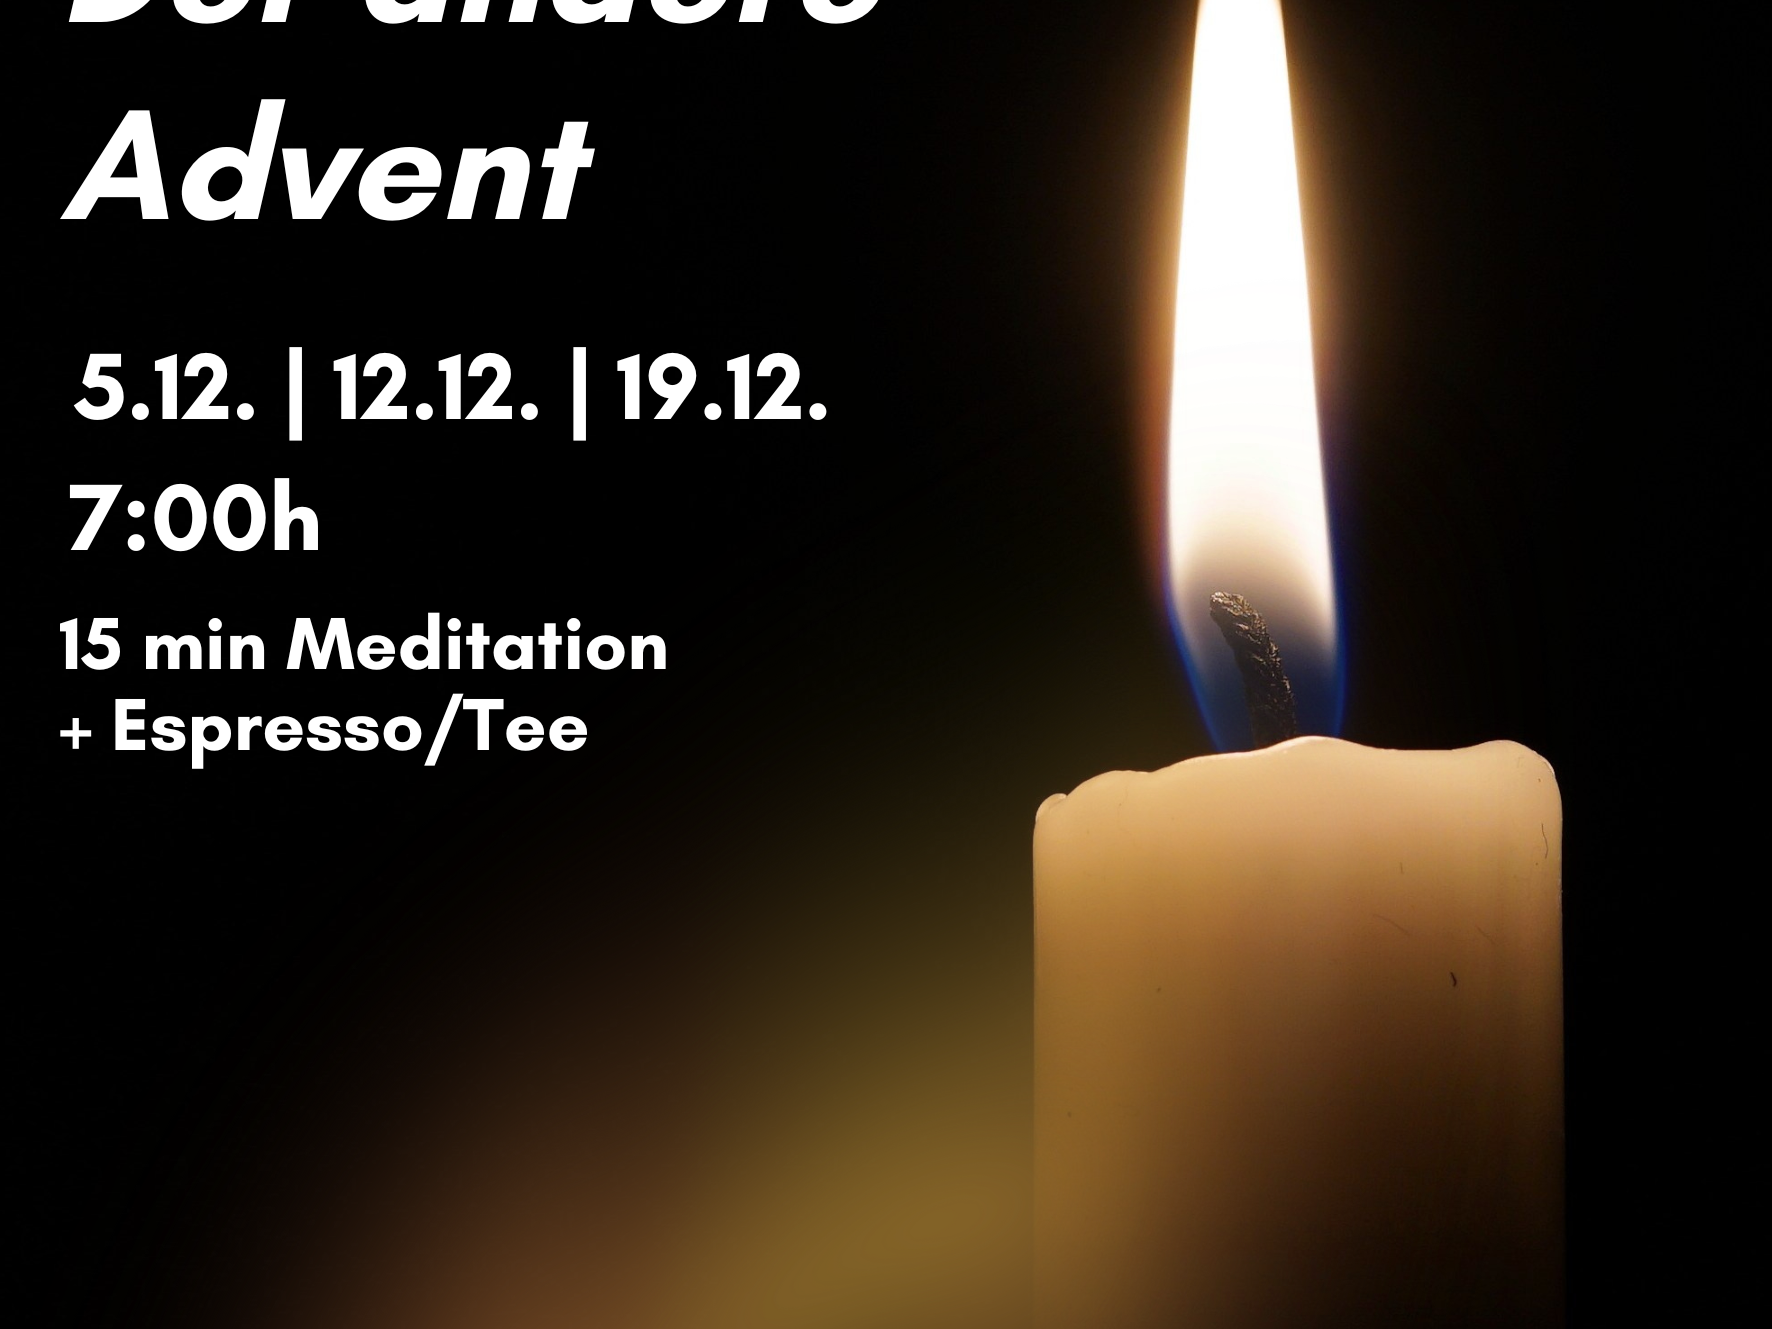 Der andere Advent